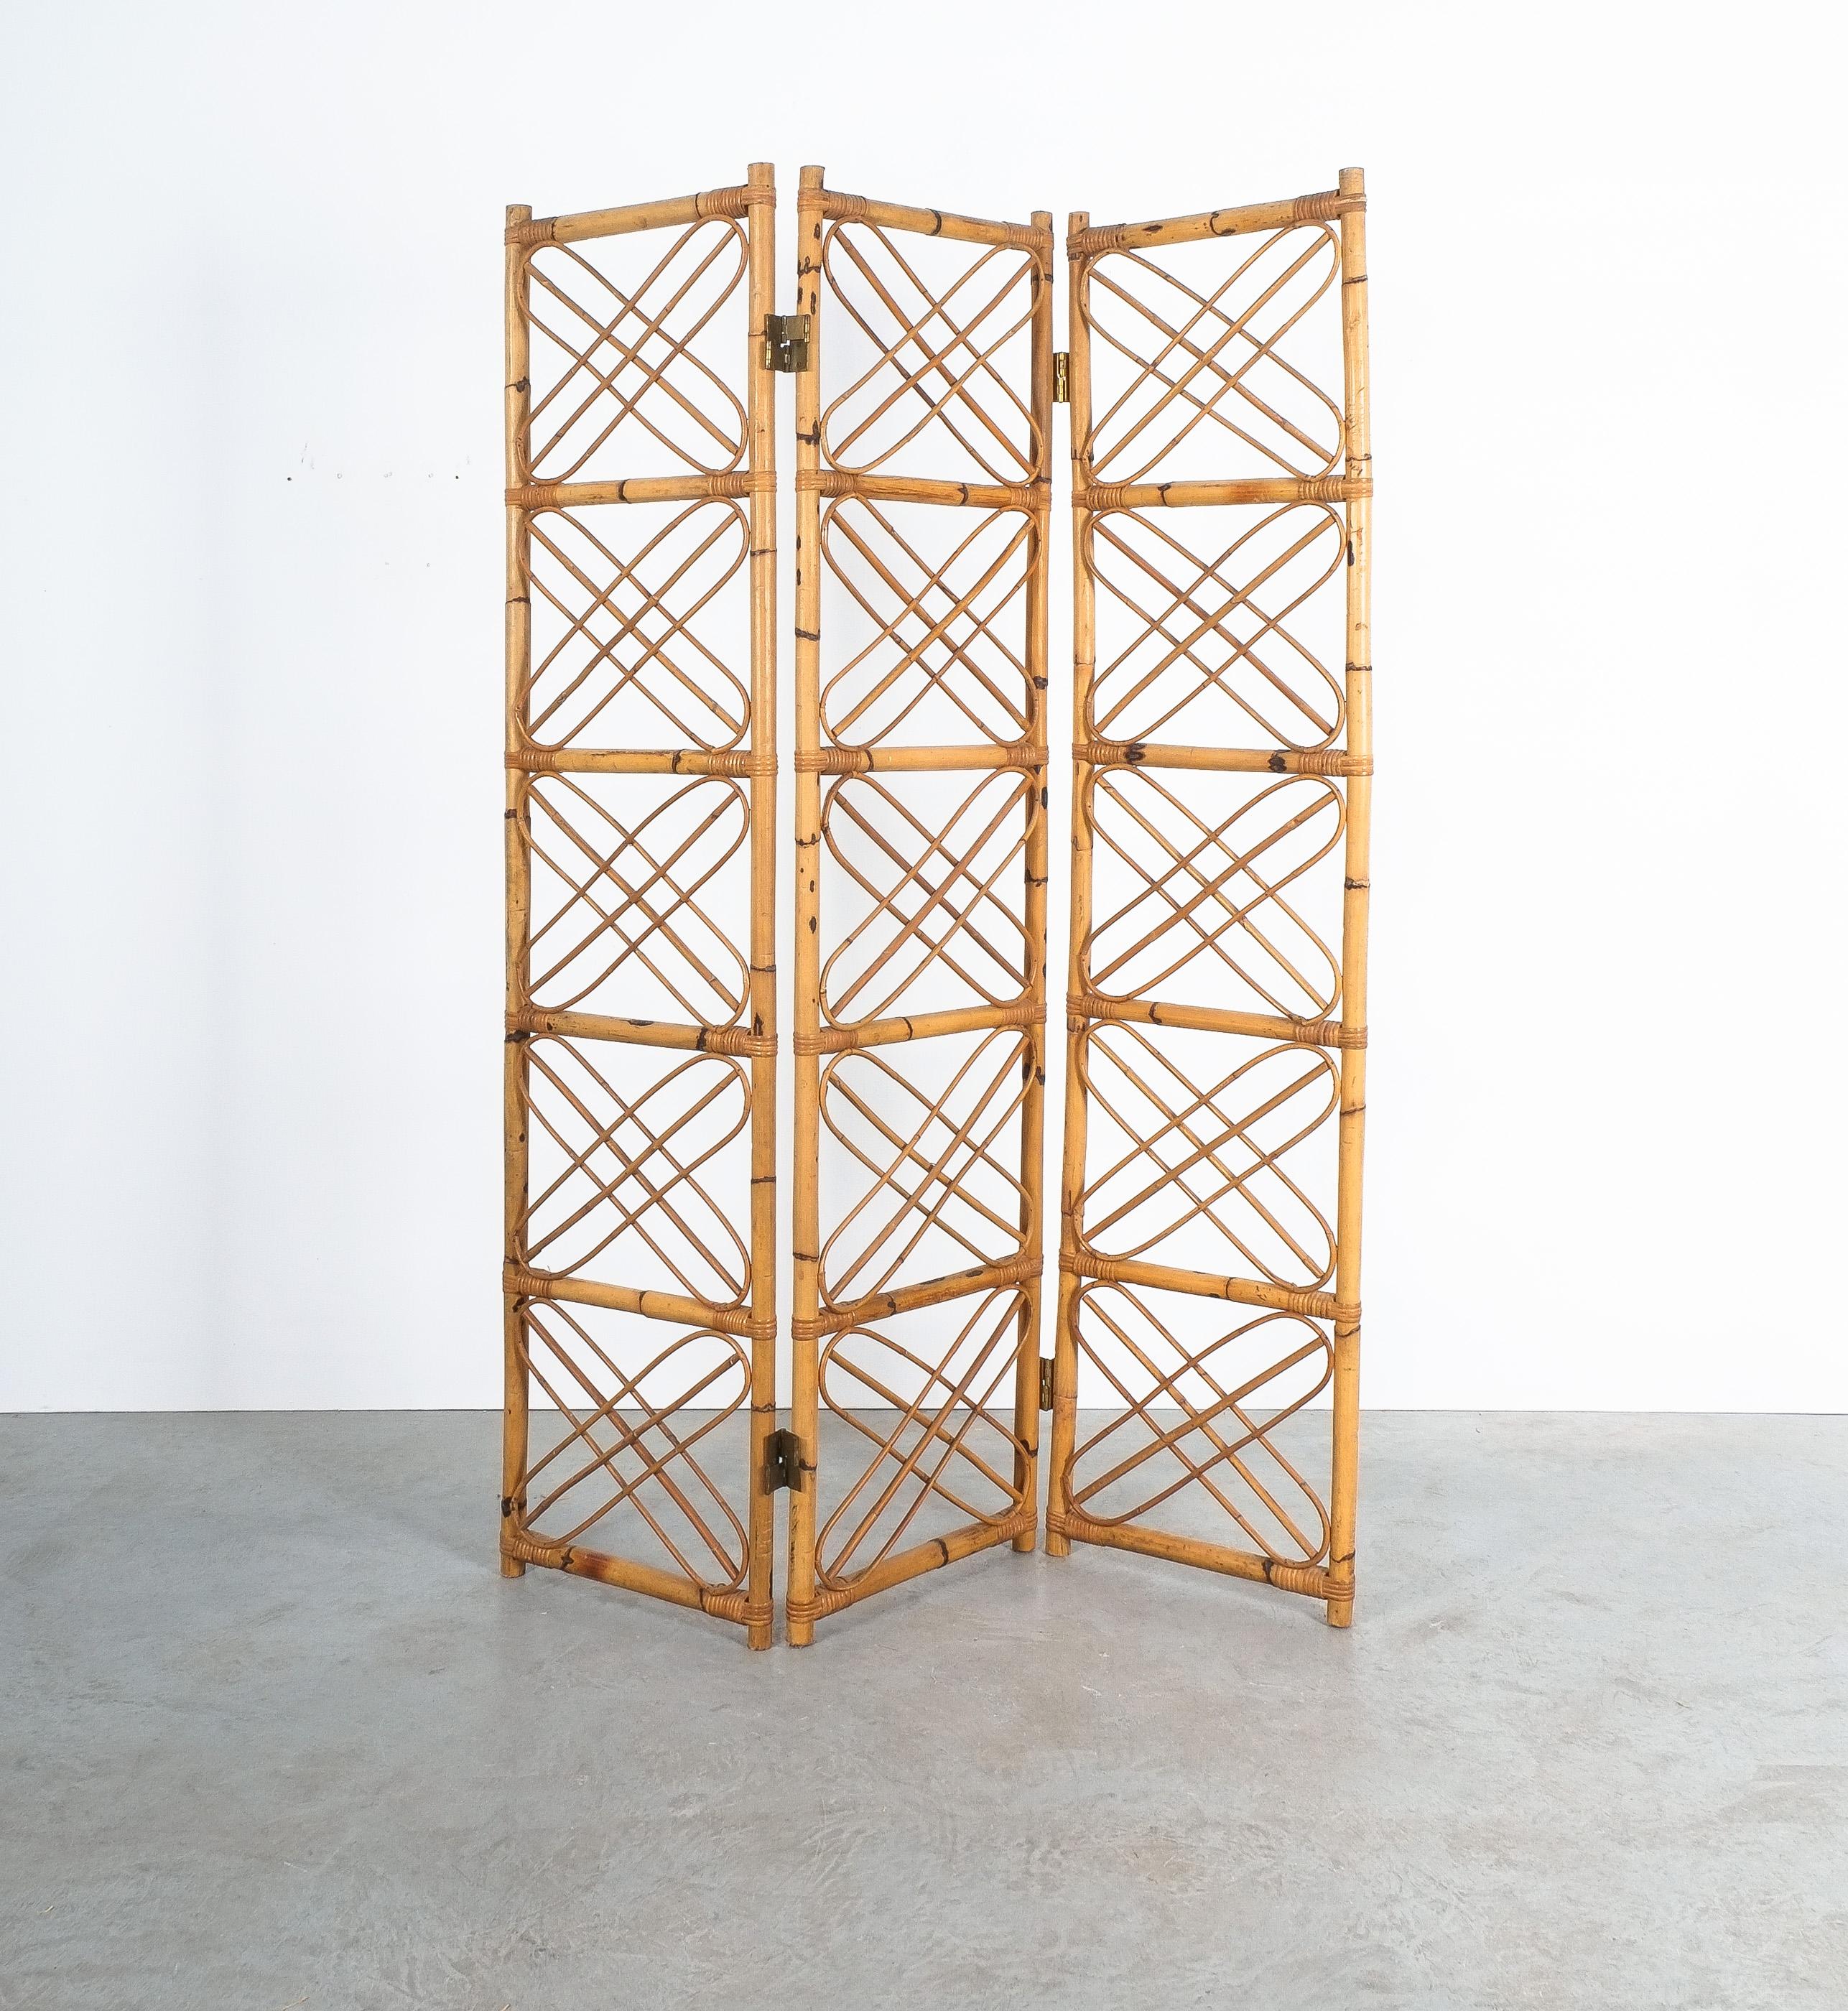 Rattan bamboo room divider screen Paravant Italy, circa 1965

Ornamental handmade screen from 3 panels made from bent bamboo and rattan pieces held together with brass hinges. In the grand picture they are form a beautiful large ornament. It's in